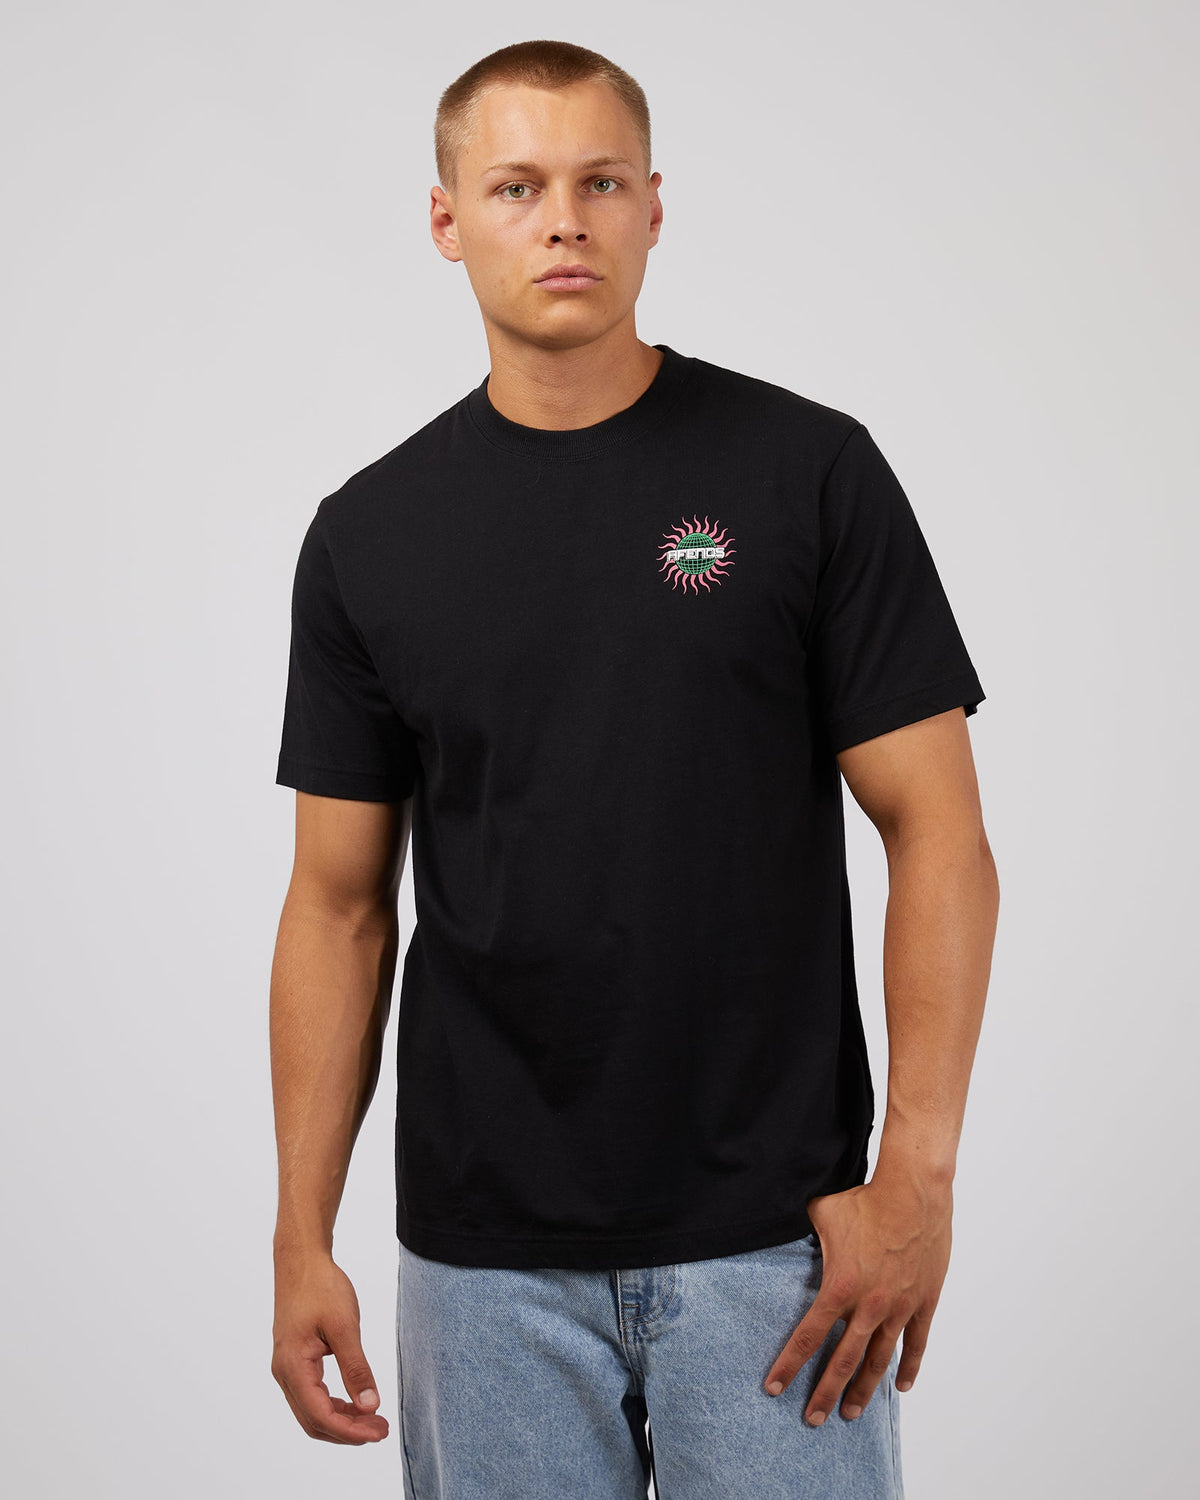 Afends-Solar Flare Recycled Retro Fit Tee Black-Edge Clothing